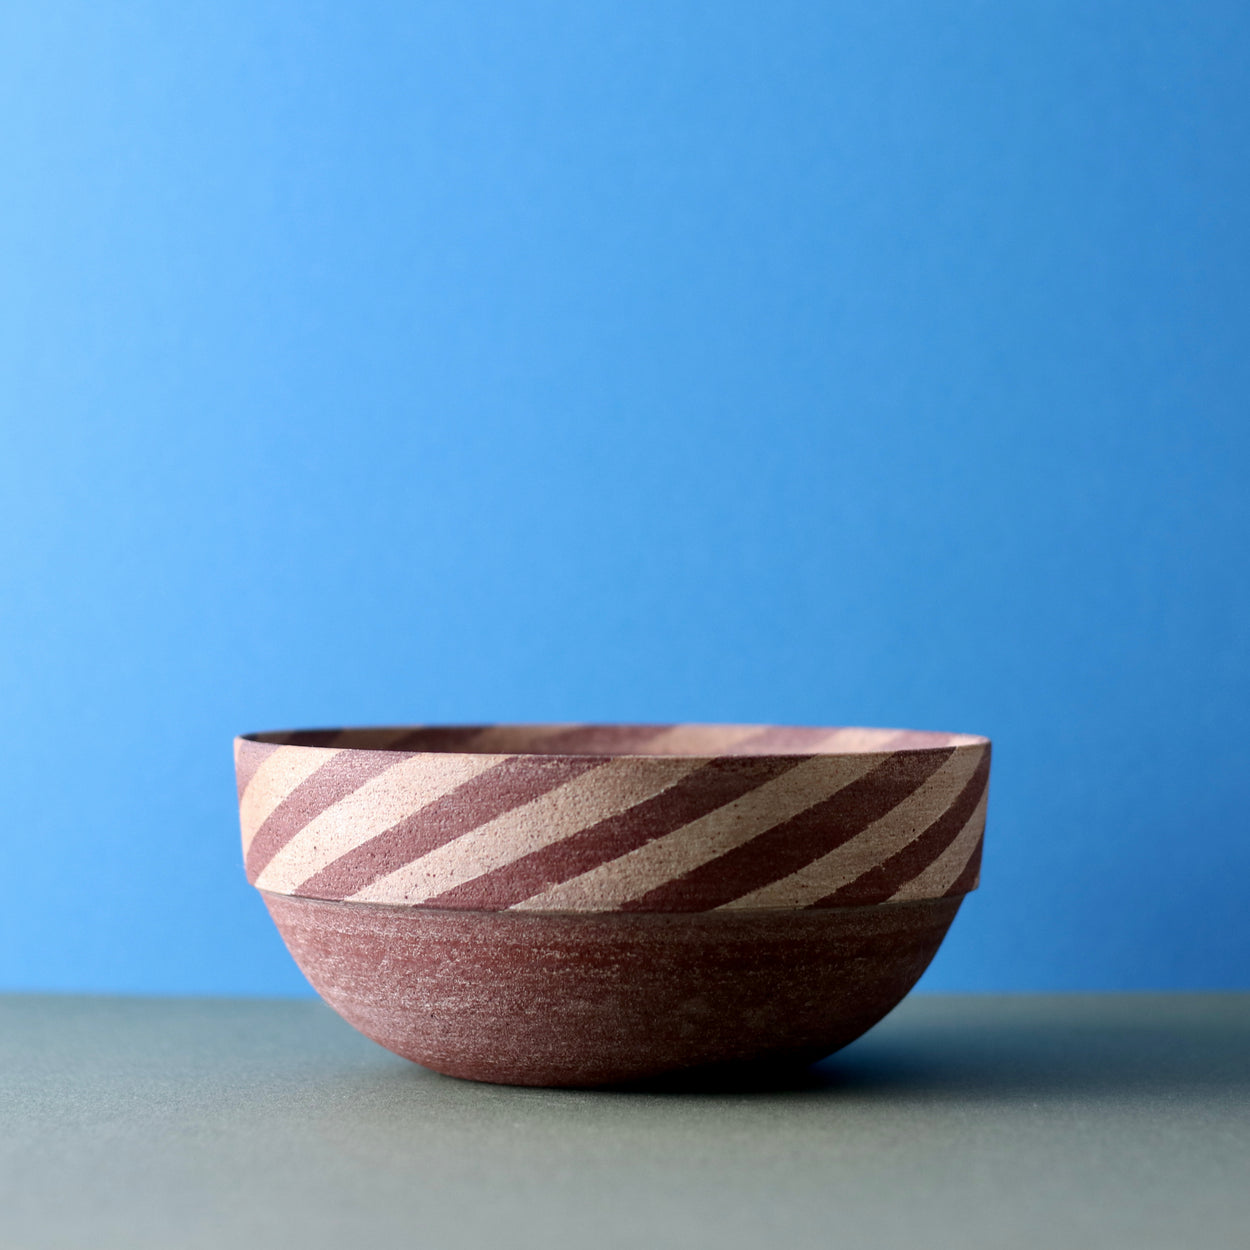 Ceramic Thin Stripe Bowl by Amanda-Sue Rope with blue green background.